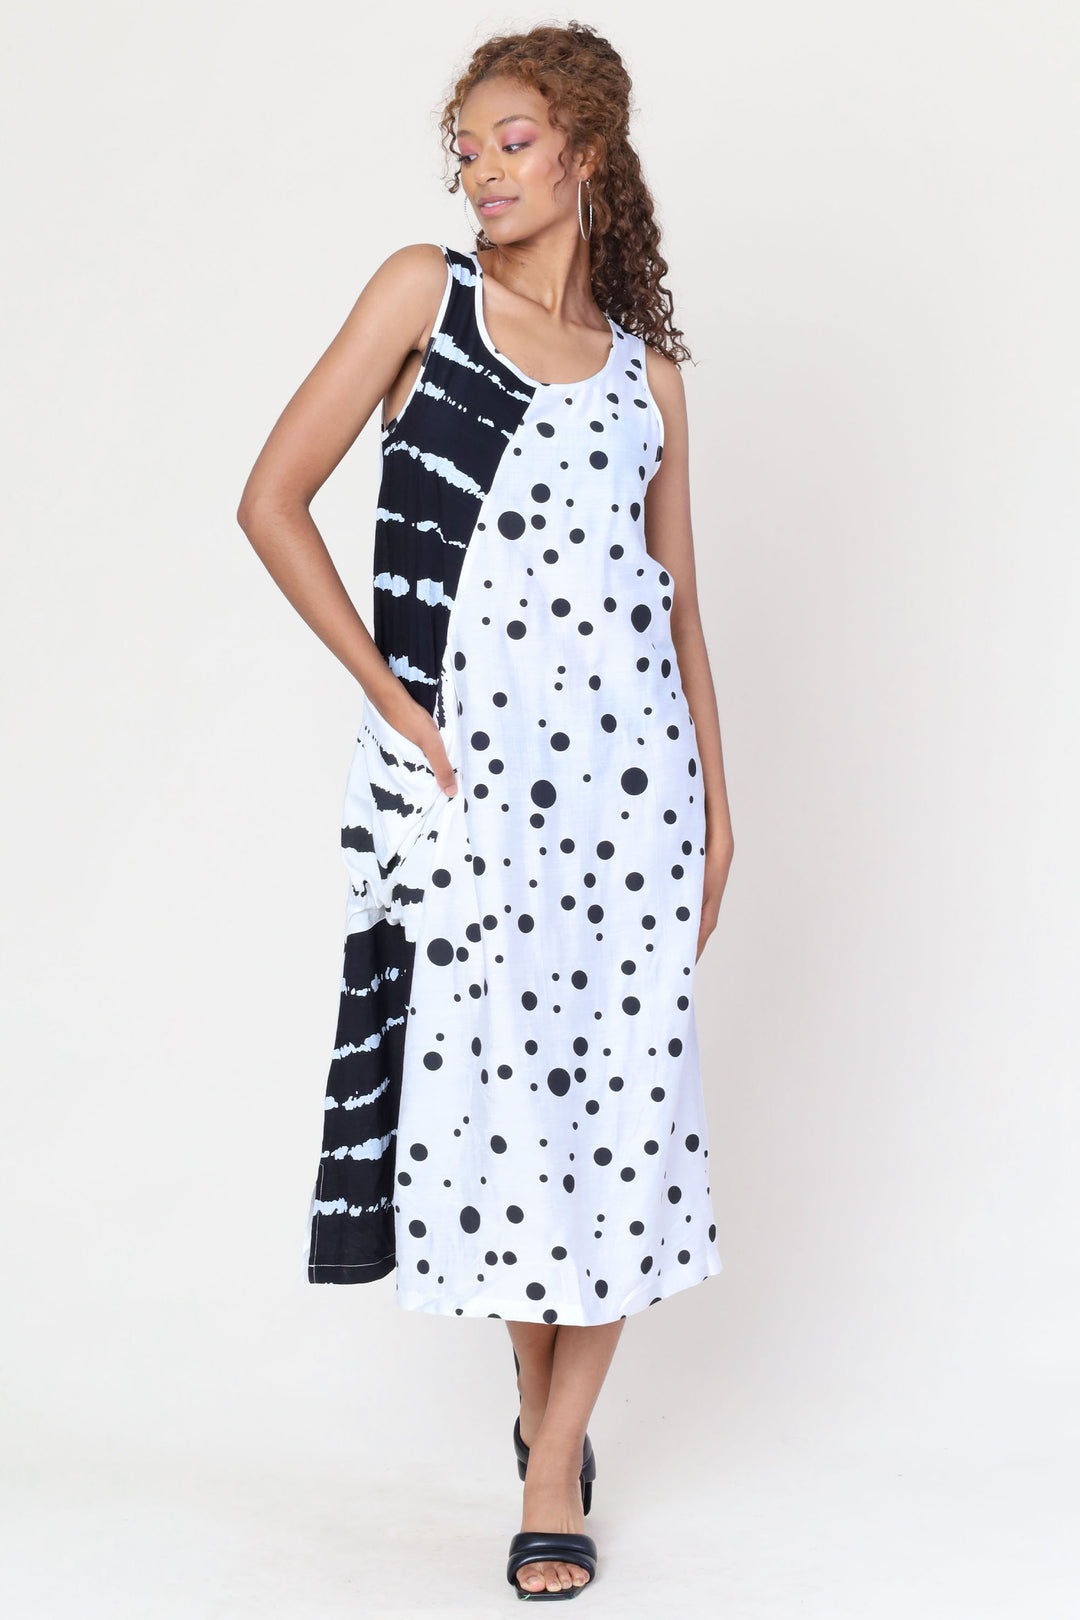 Fashion Concepts Summer 2024 Crafted with soft fabrics, this sleeveless dress with round neck and large pocket on the side is sure to keep you cool and comfortable on warmer days.